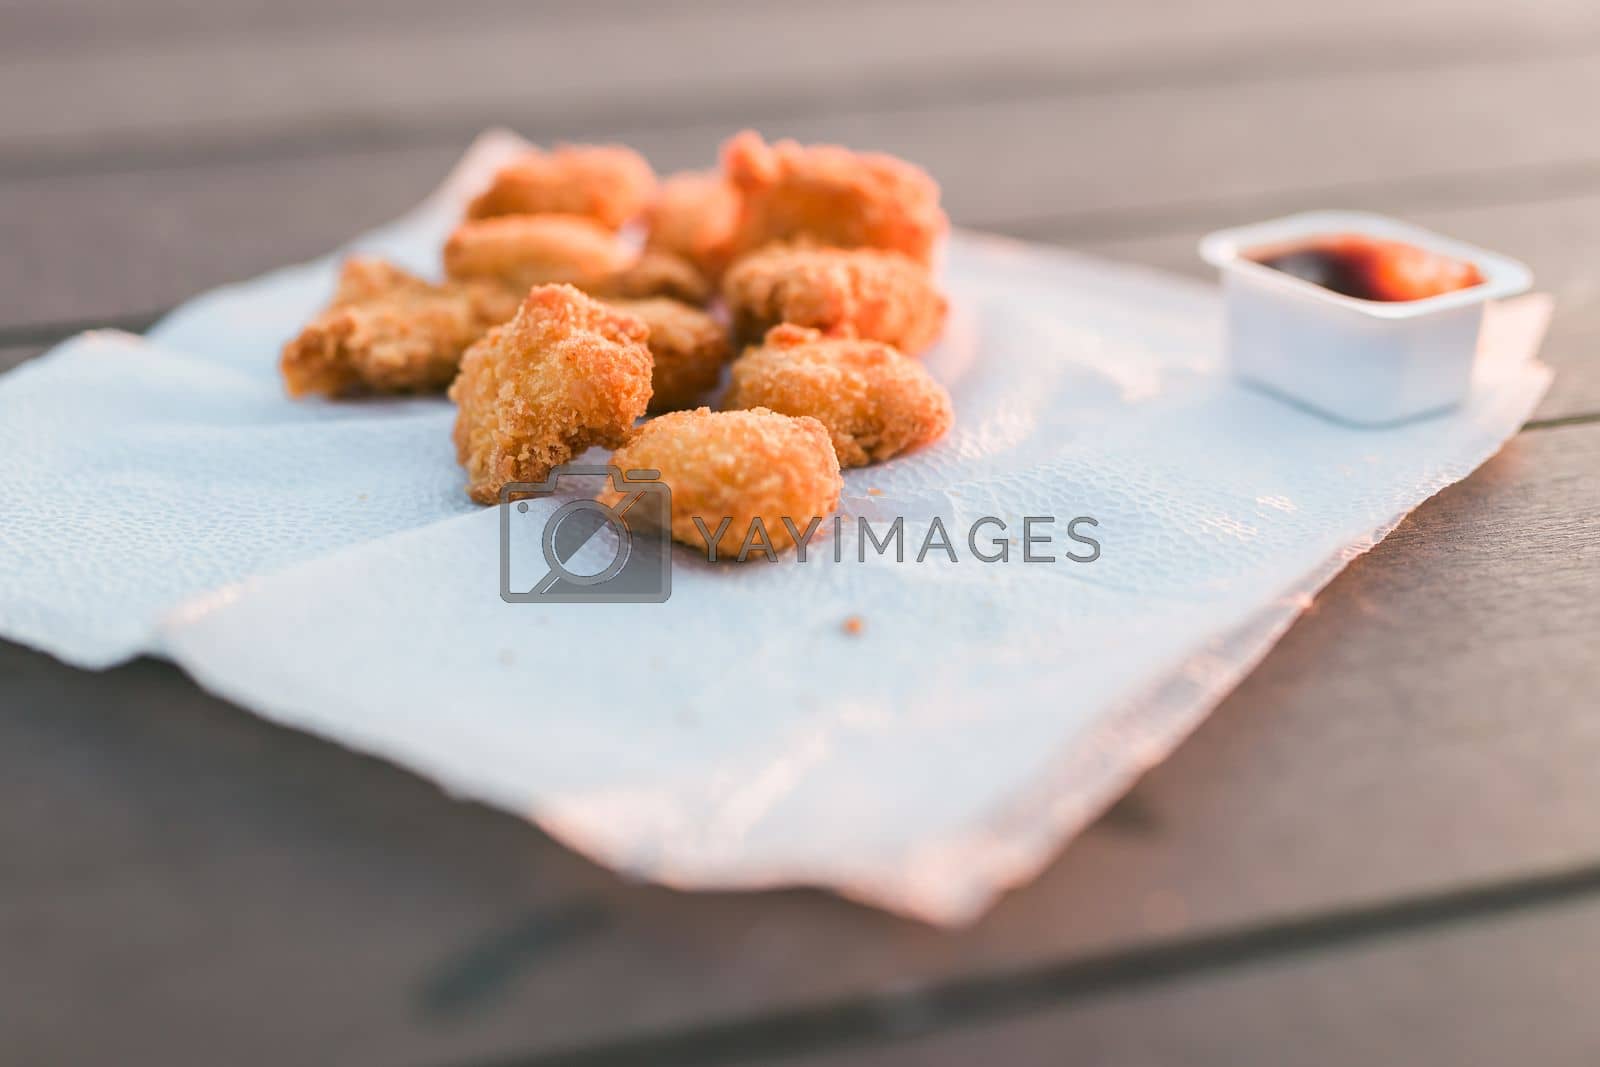 Royalty free image of Chicken nuggets with sauces on napkin on wooden background outdoor meal - fast food, junk food and picnic concept by Satura86